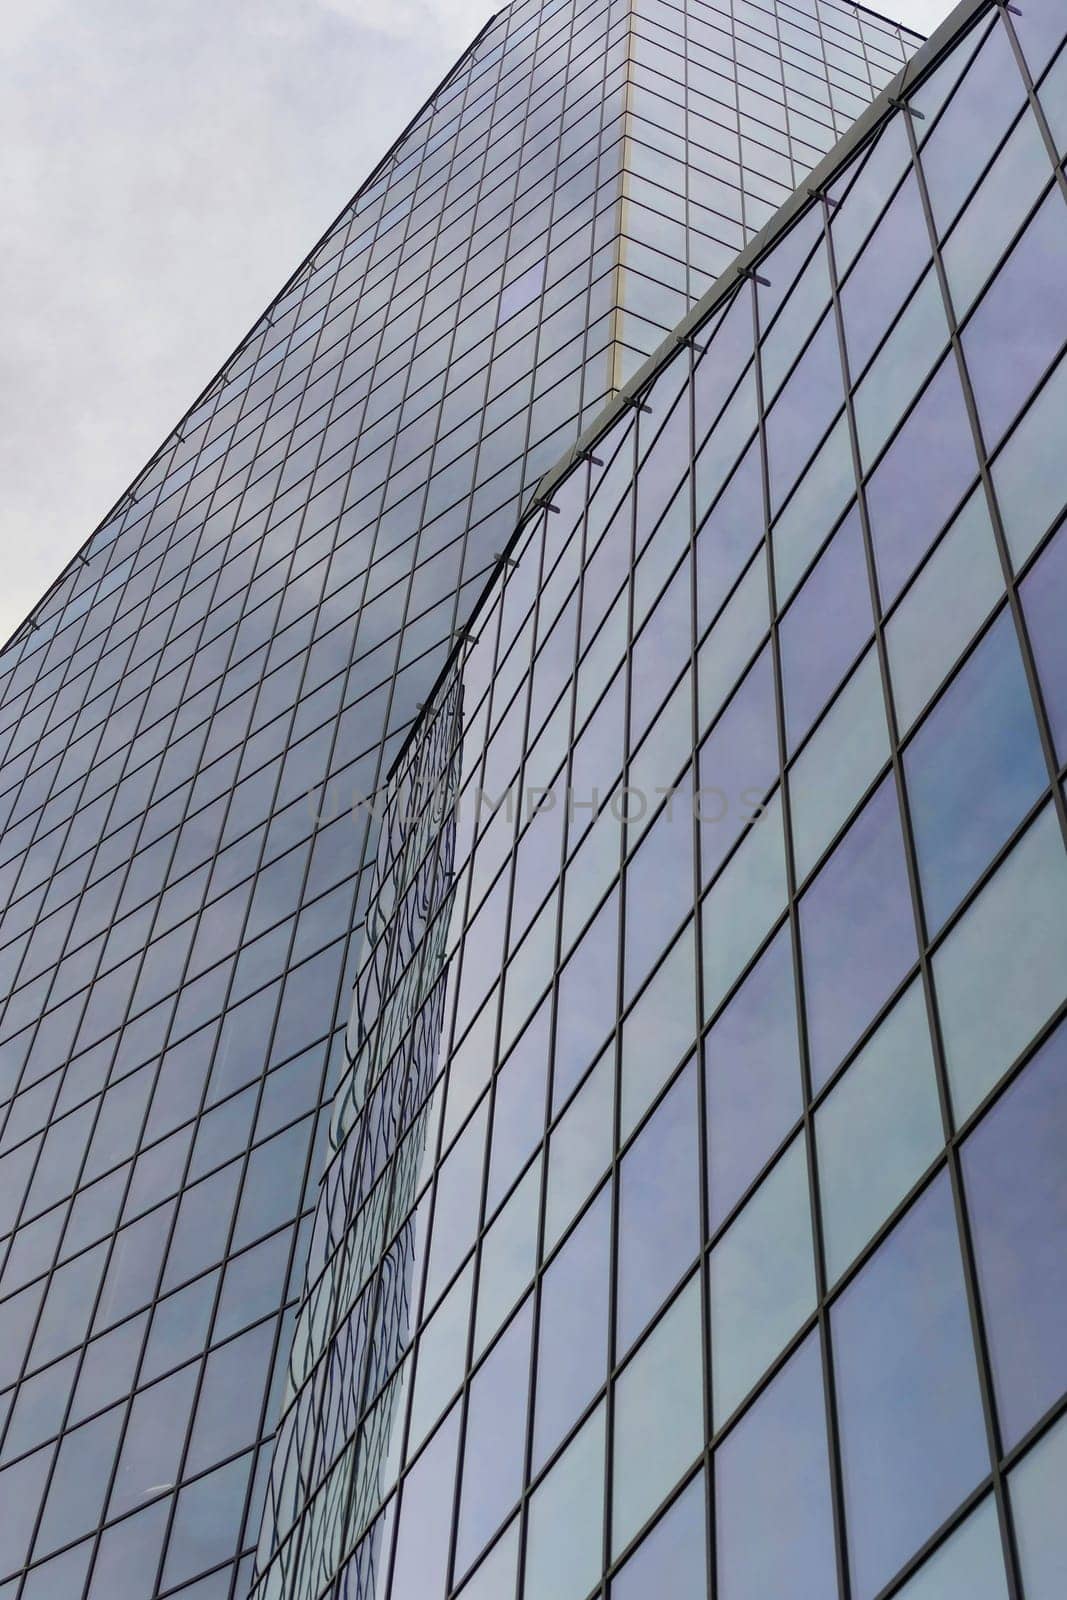 glass facade of skyscraper in perspective for vertical urban background.